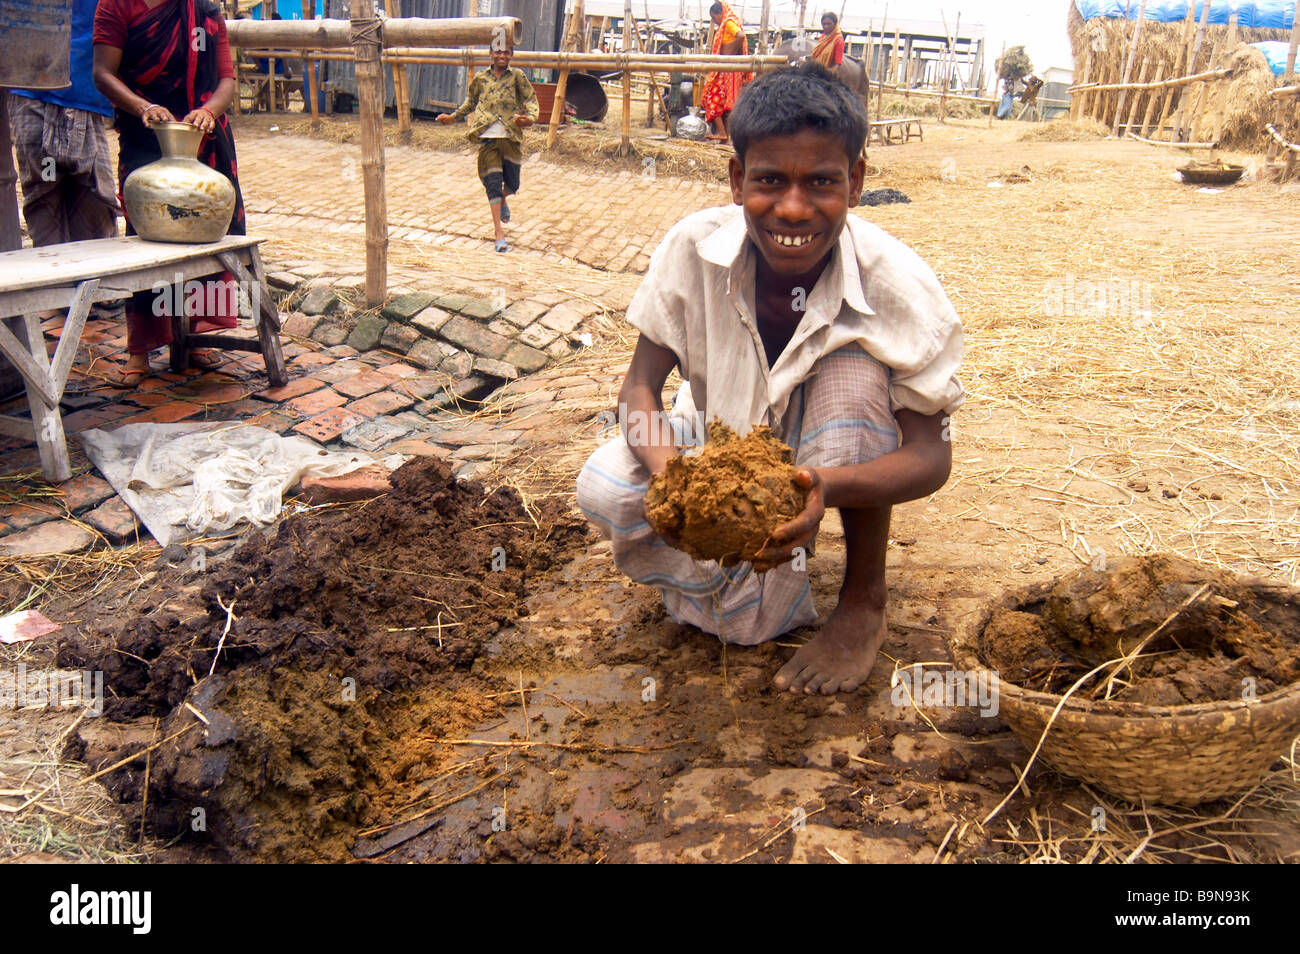 Boy packing cow dung child labor poverty hard work Stock Photo